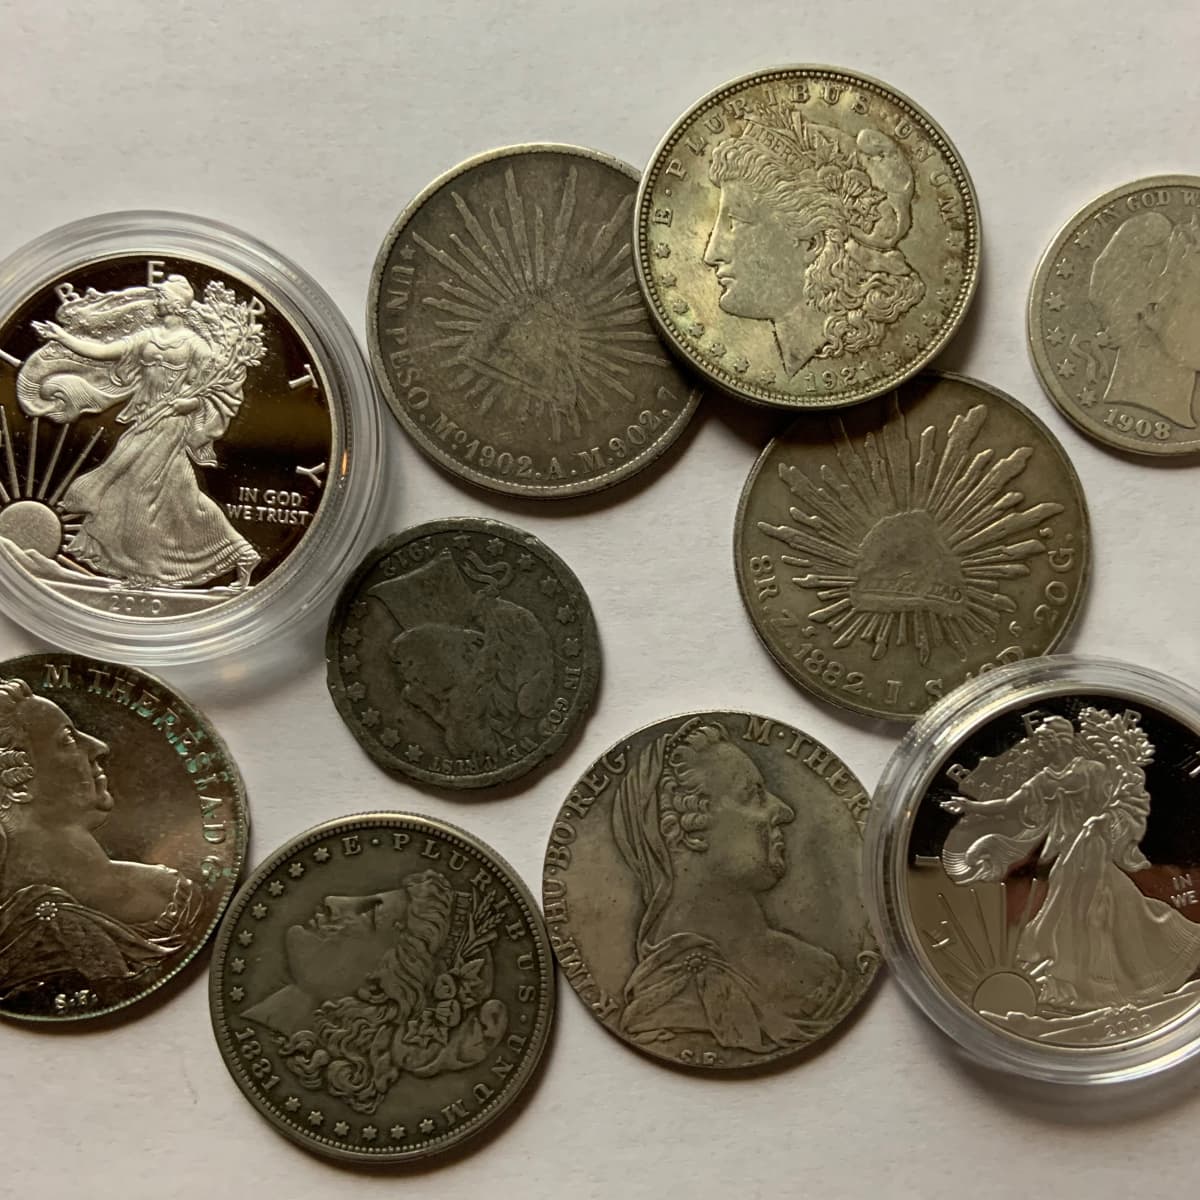 Find Out Your Coin Authenticity Grade and if it's a Valuable Error Coin -  American Rarities